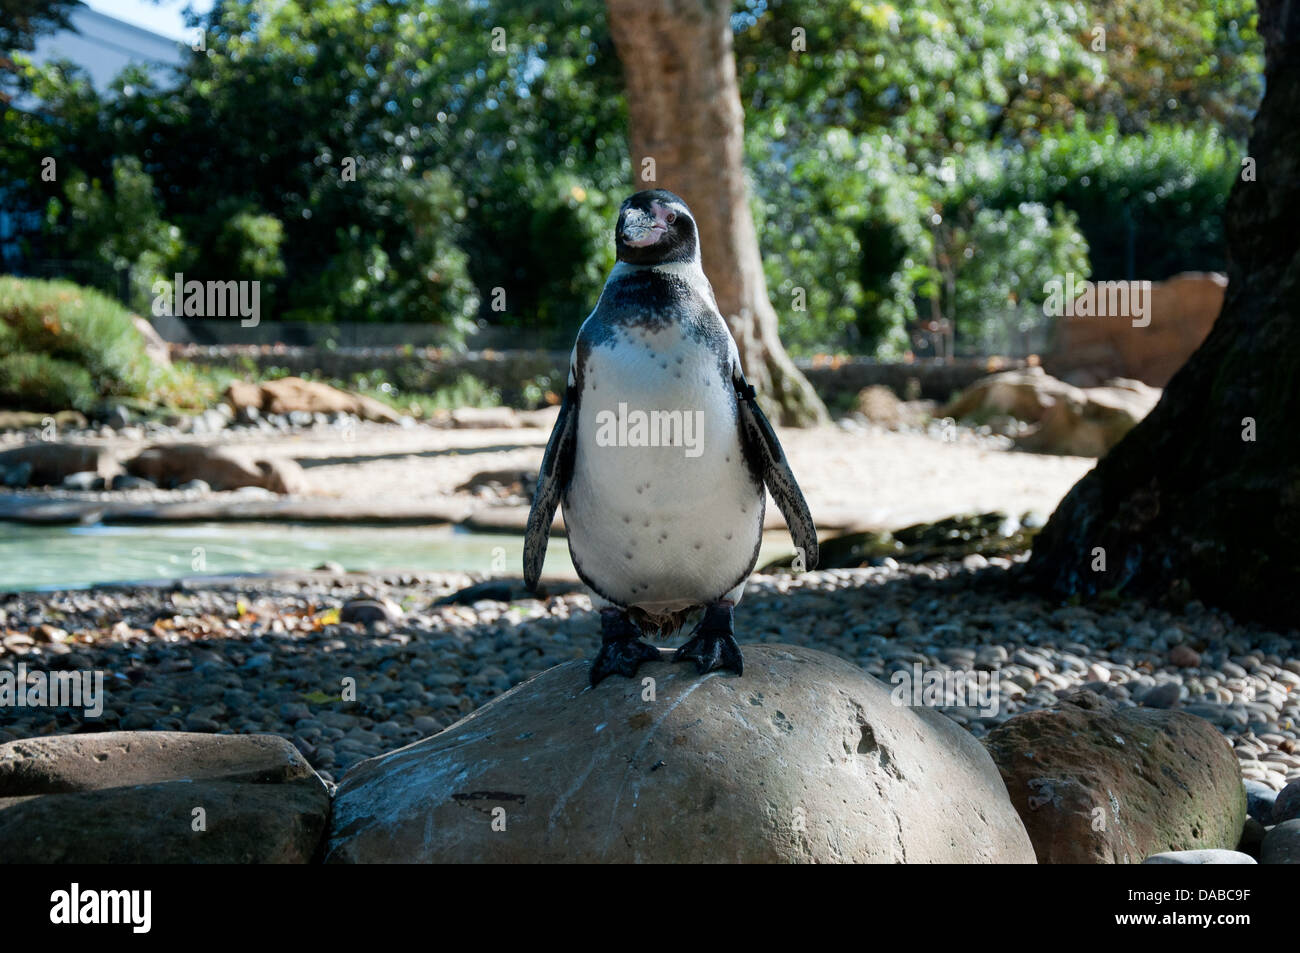 Penguin posing at London Zoo Banque D'Images